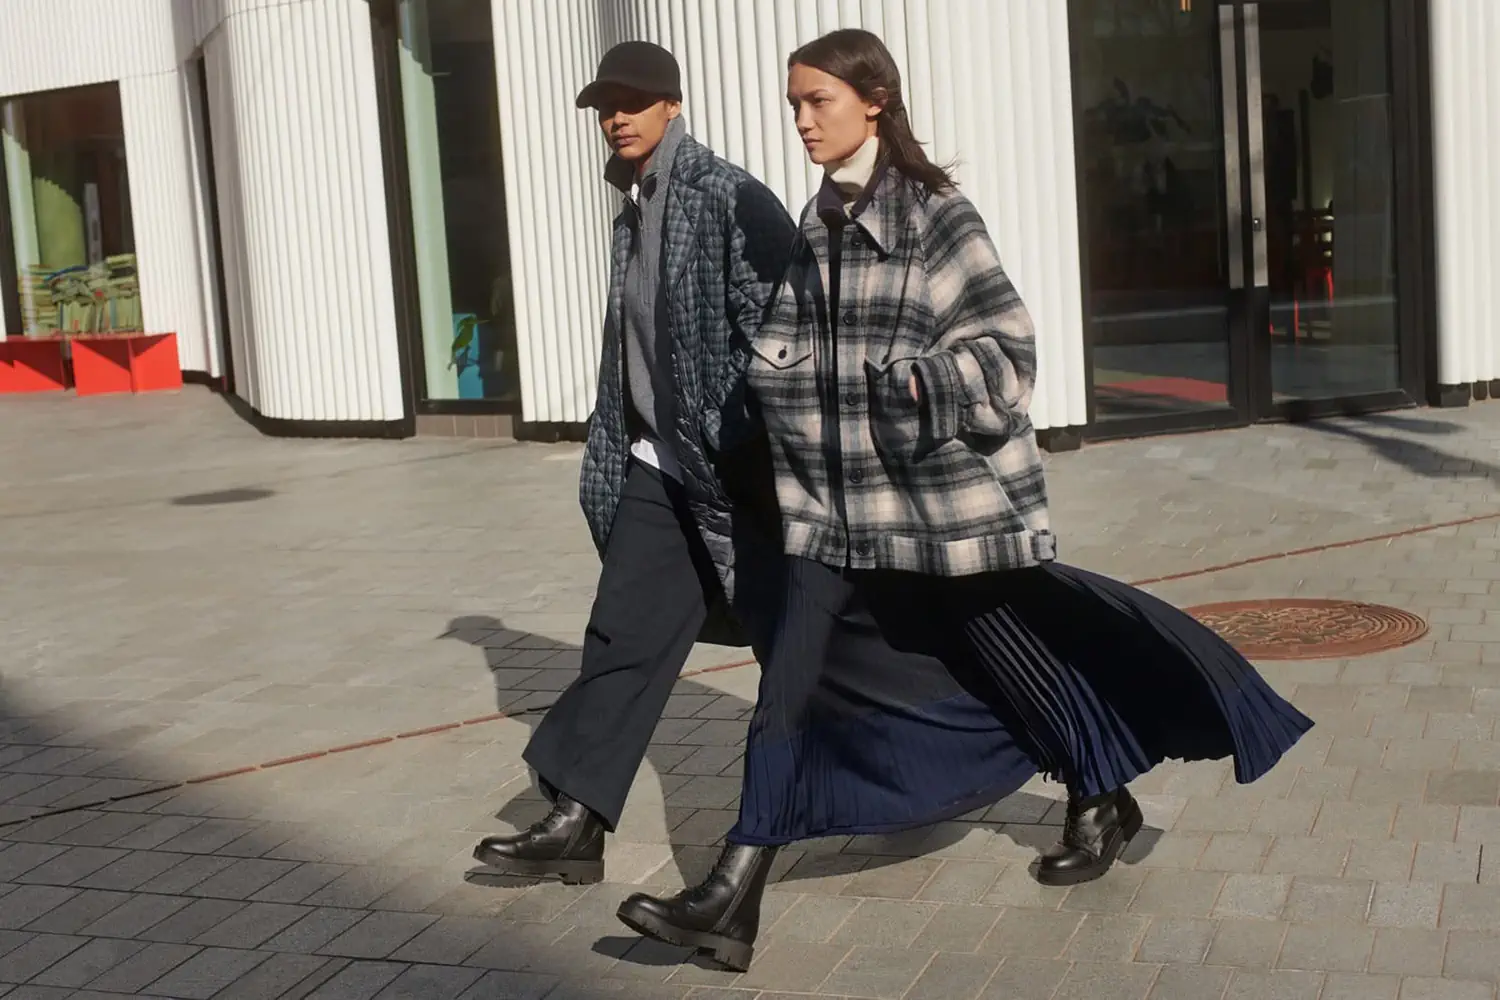 Uniqlo and Clare Waight Keller craft elegance together